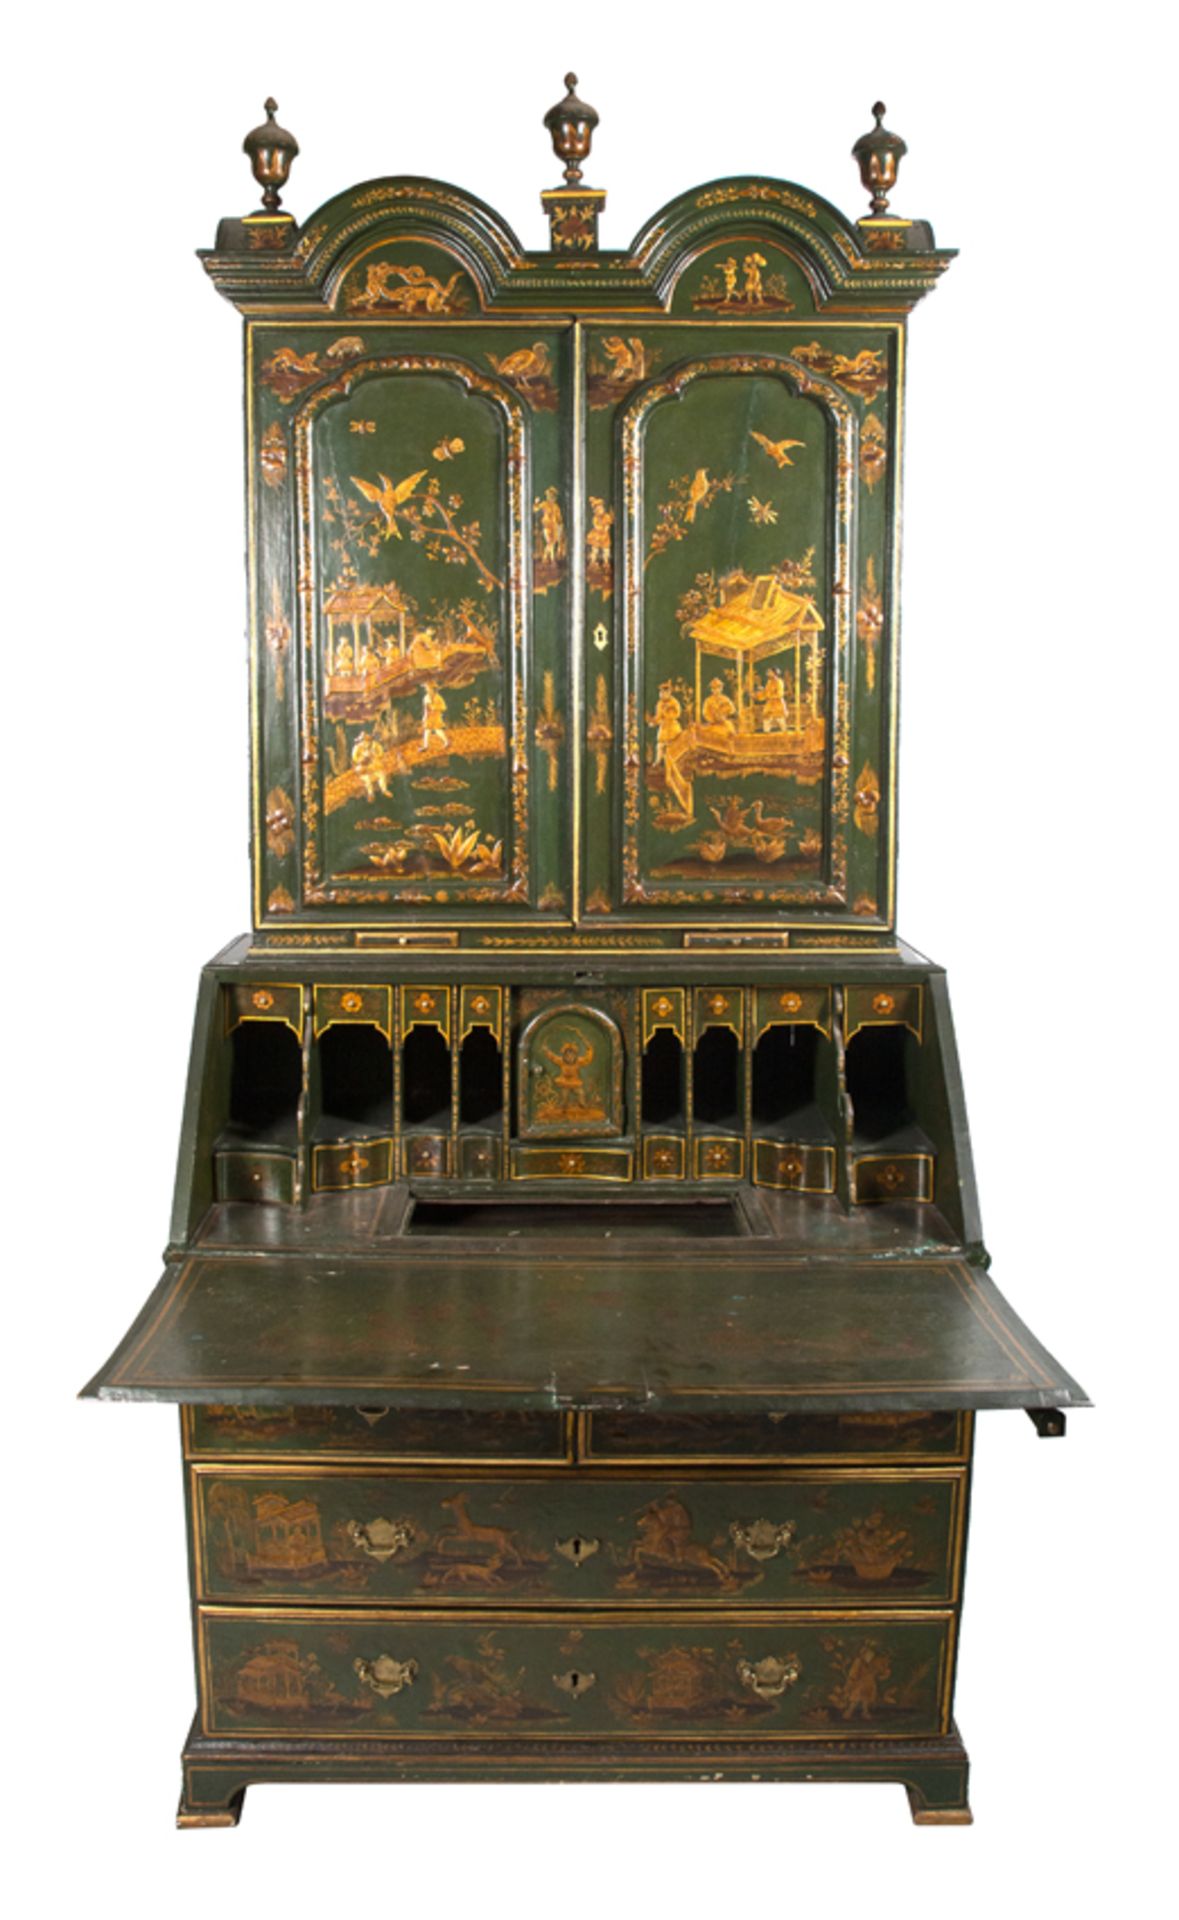 Carved, lacquered and gilded wooden cabinet with Chinese-style decoration England. 19th century. - Bild 3 aus 11